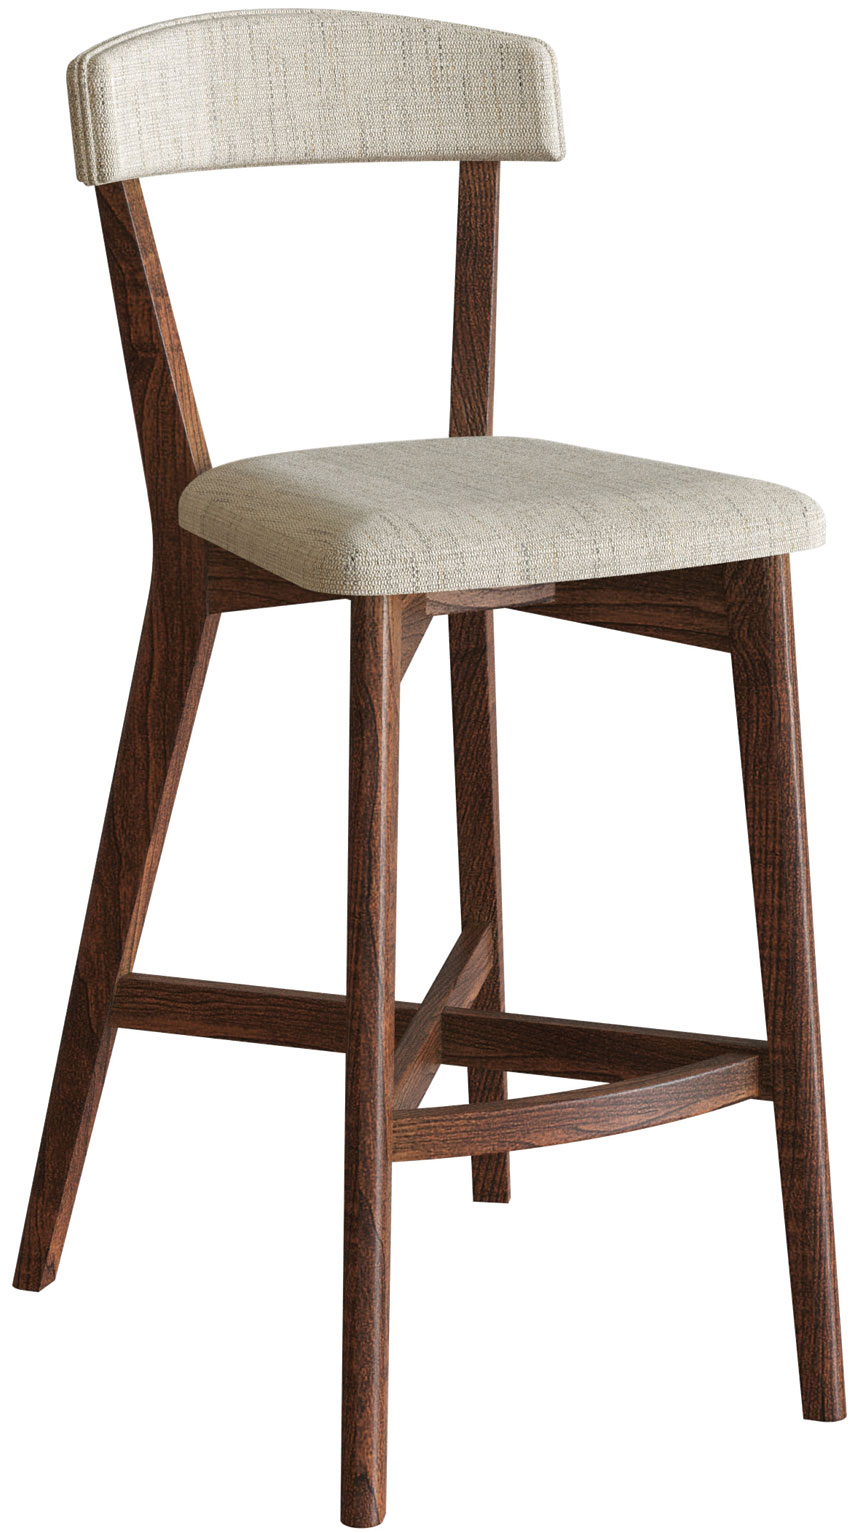 Tremont Keelan Counter Chair